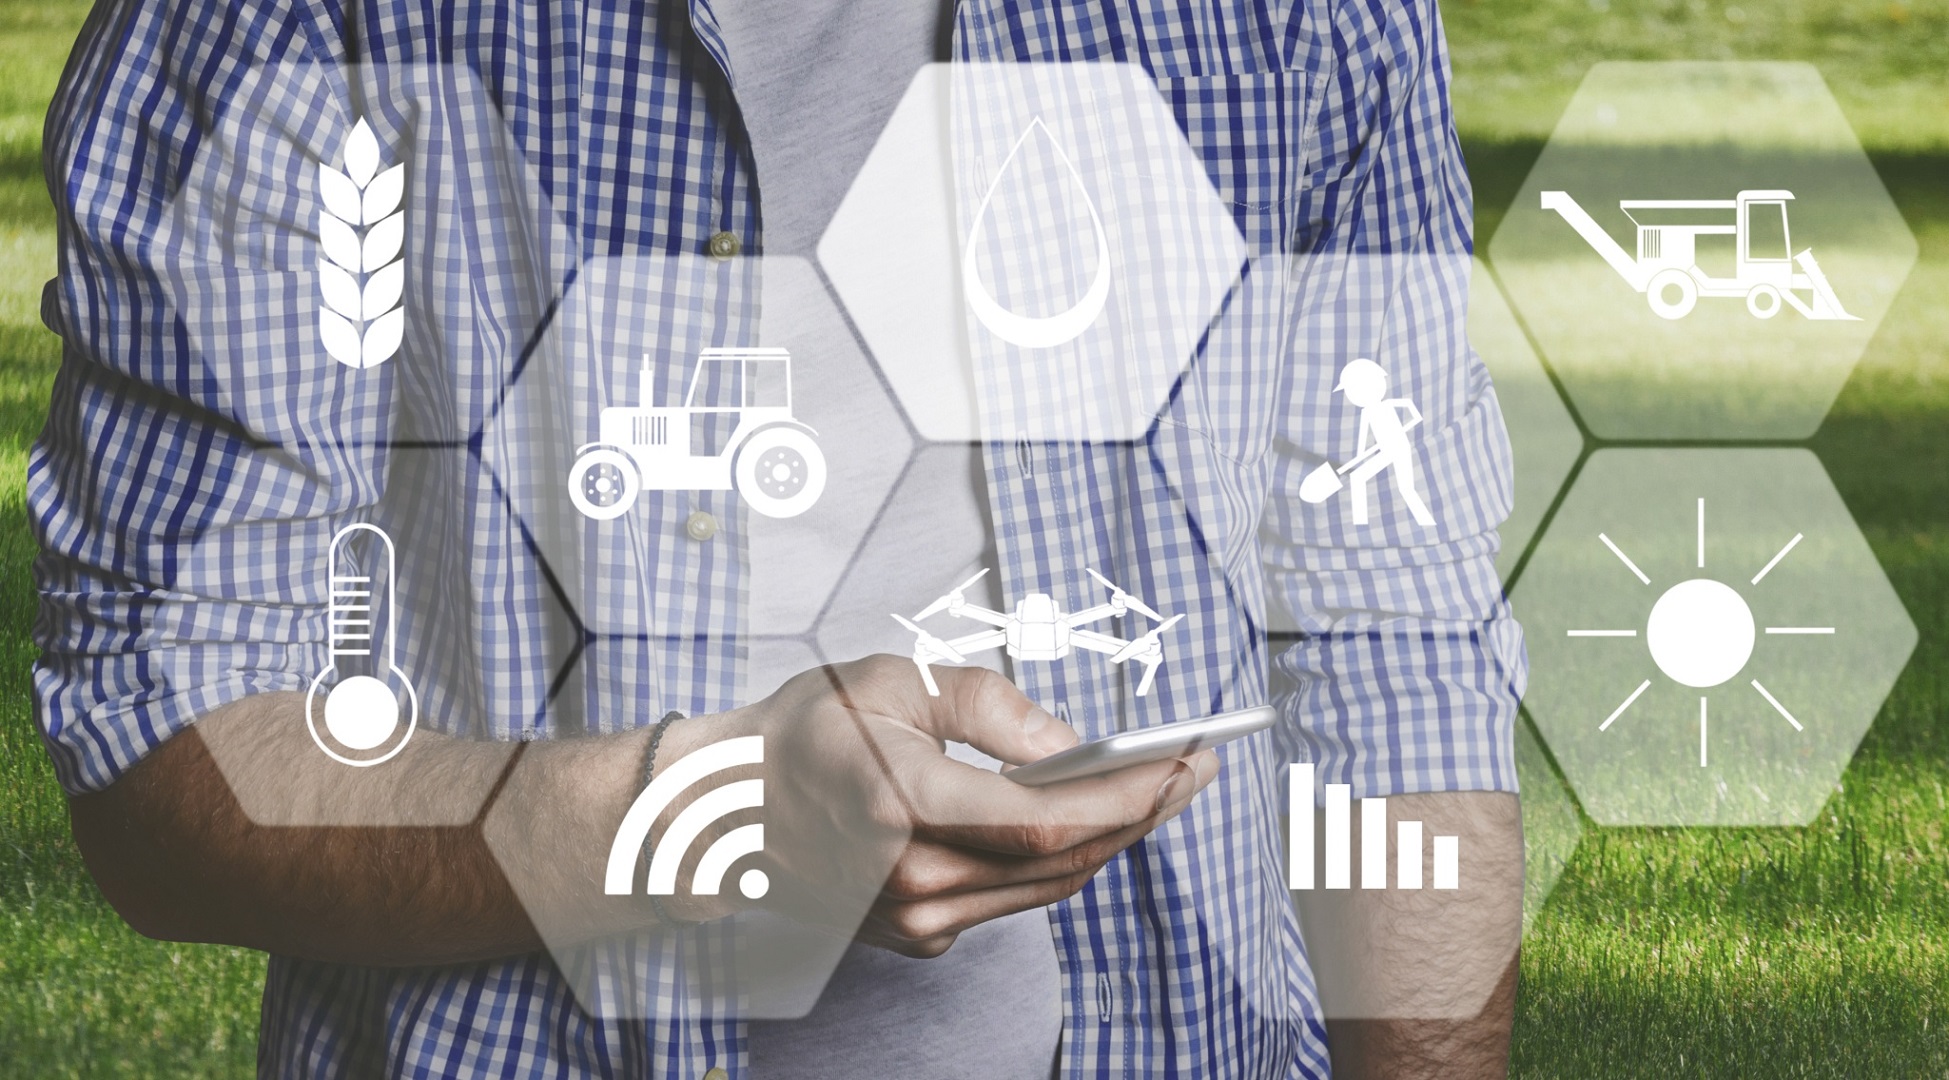 Smart Agriculture: Engineering's vision for the digitalisation of Agriculture